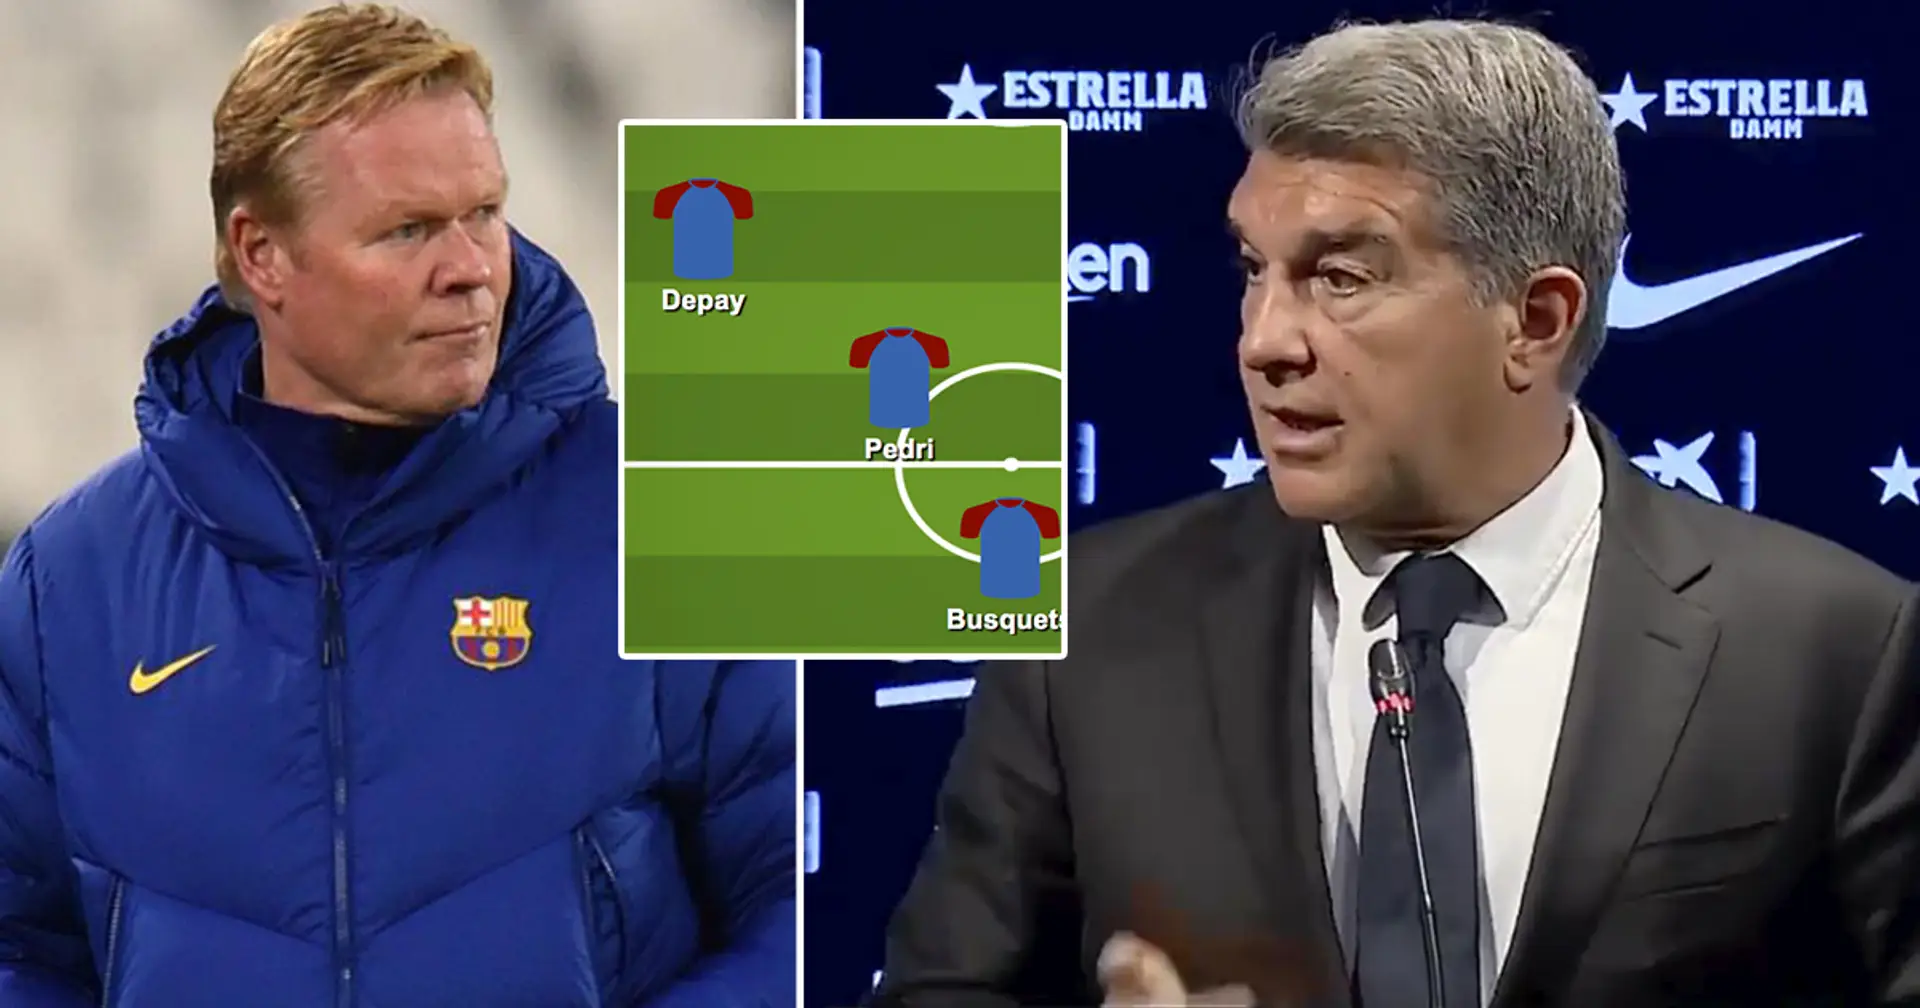 'I want to see a more attack-minded Barca': Laporta talks his tactical expectations from Koeman